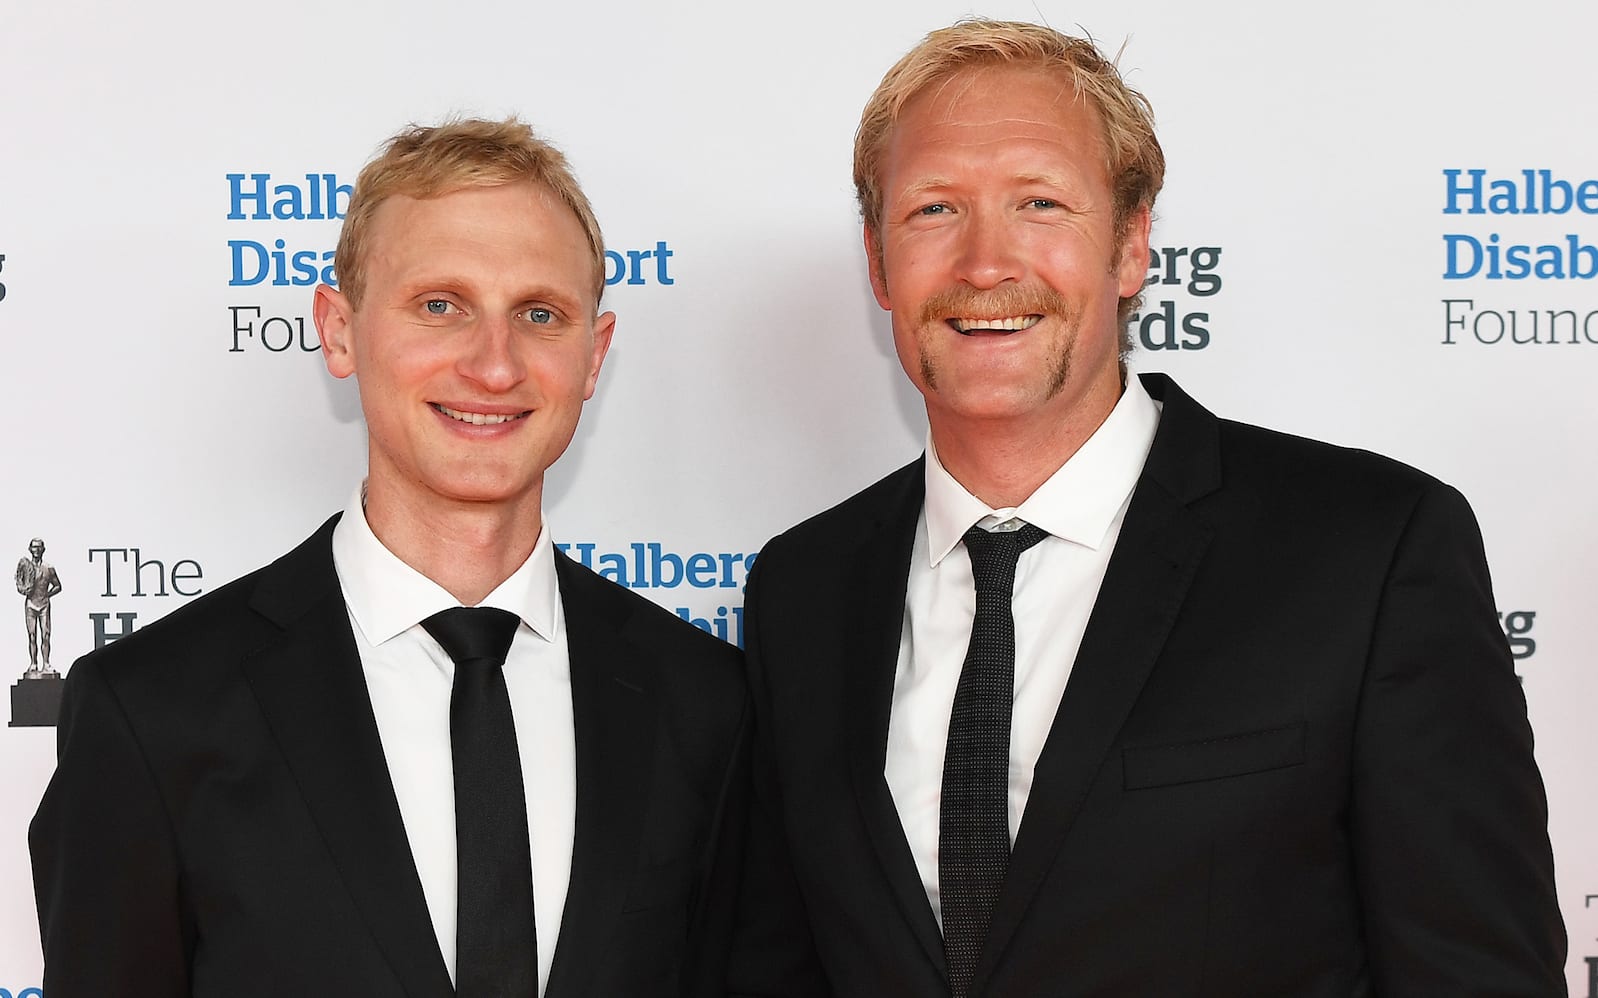 Hamish Bond and Eric Murray on the red carpet at the 54th Halberg Awards in support of the Halberg Disability Sport Foundation in 2017.